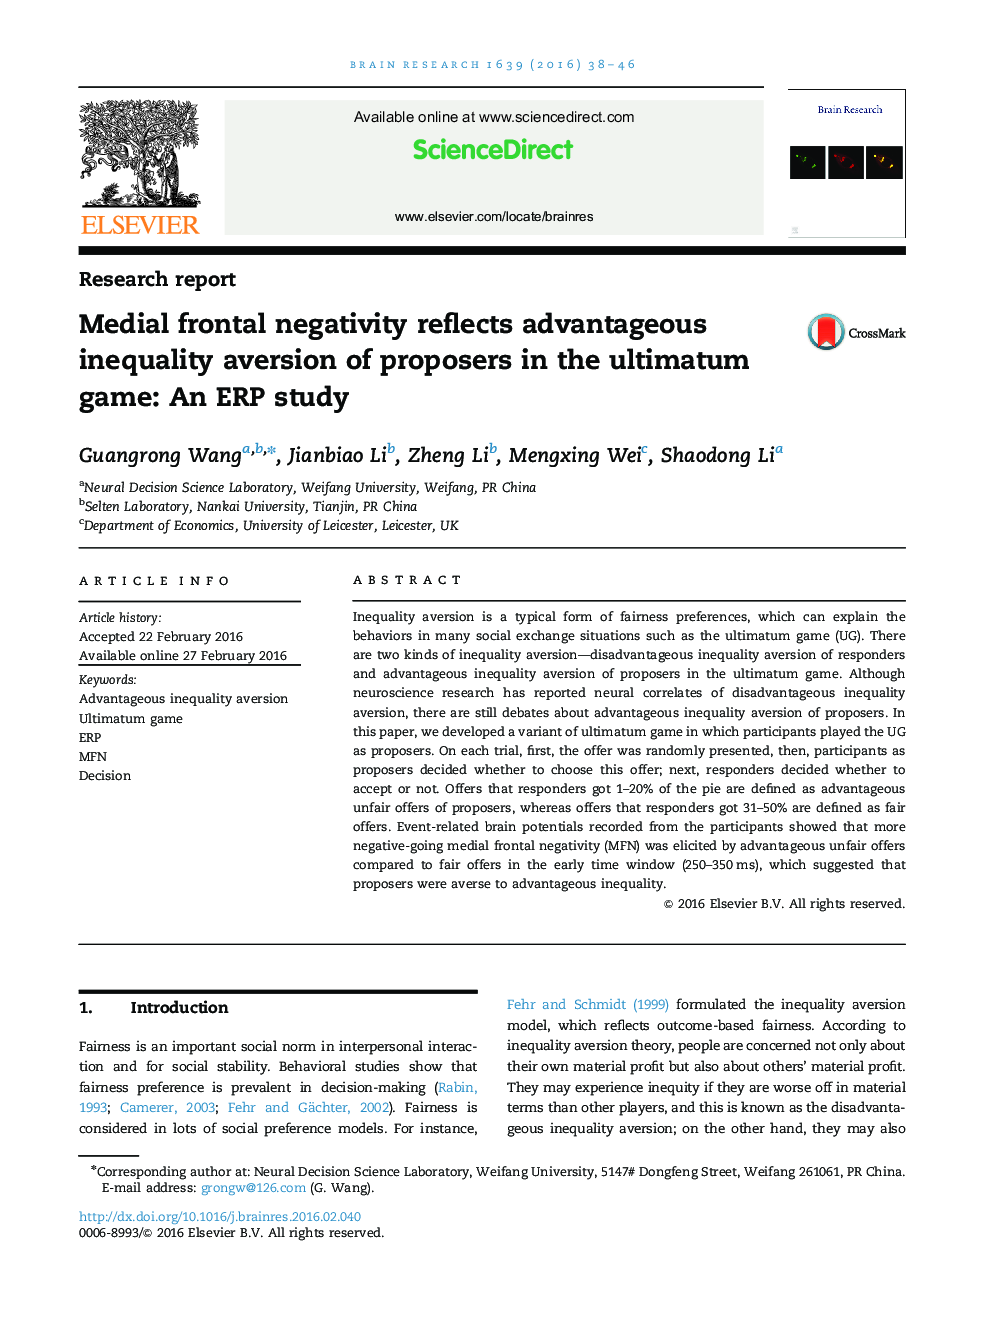 Research reportMedial frontal negativity reflects advantageous inequality aversion of proposers in the ultimatum game: An ERP study